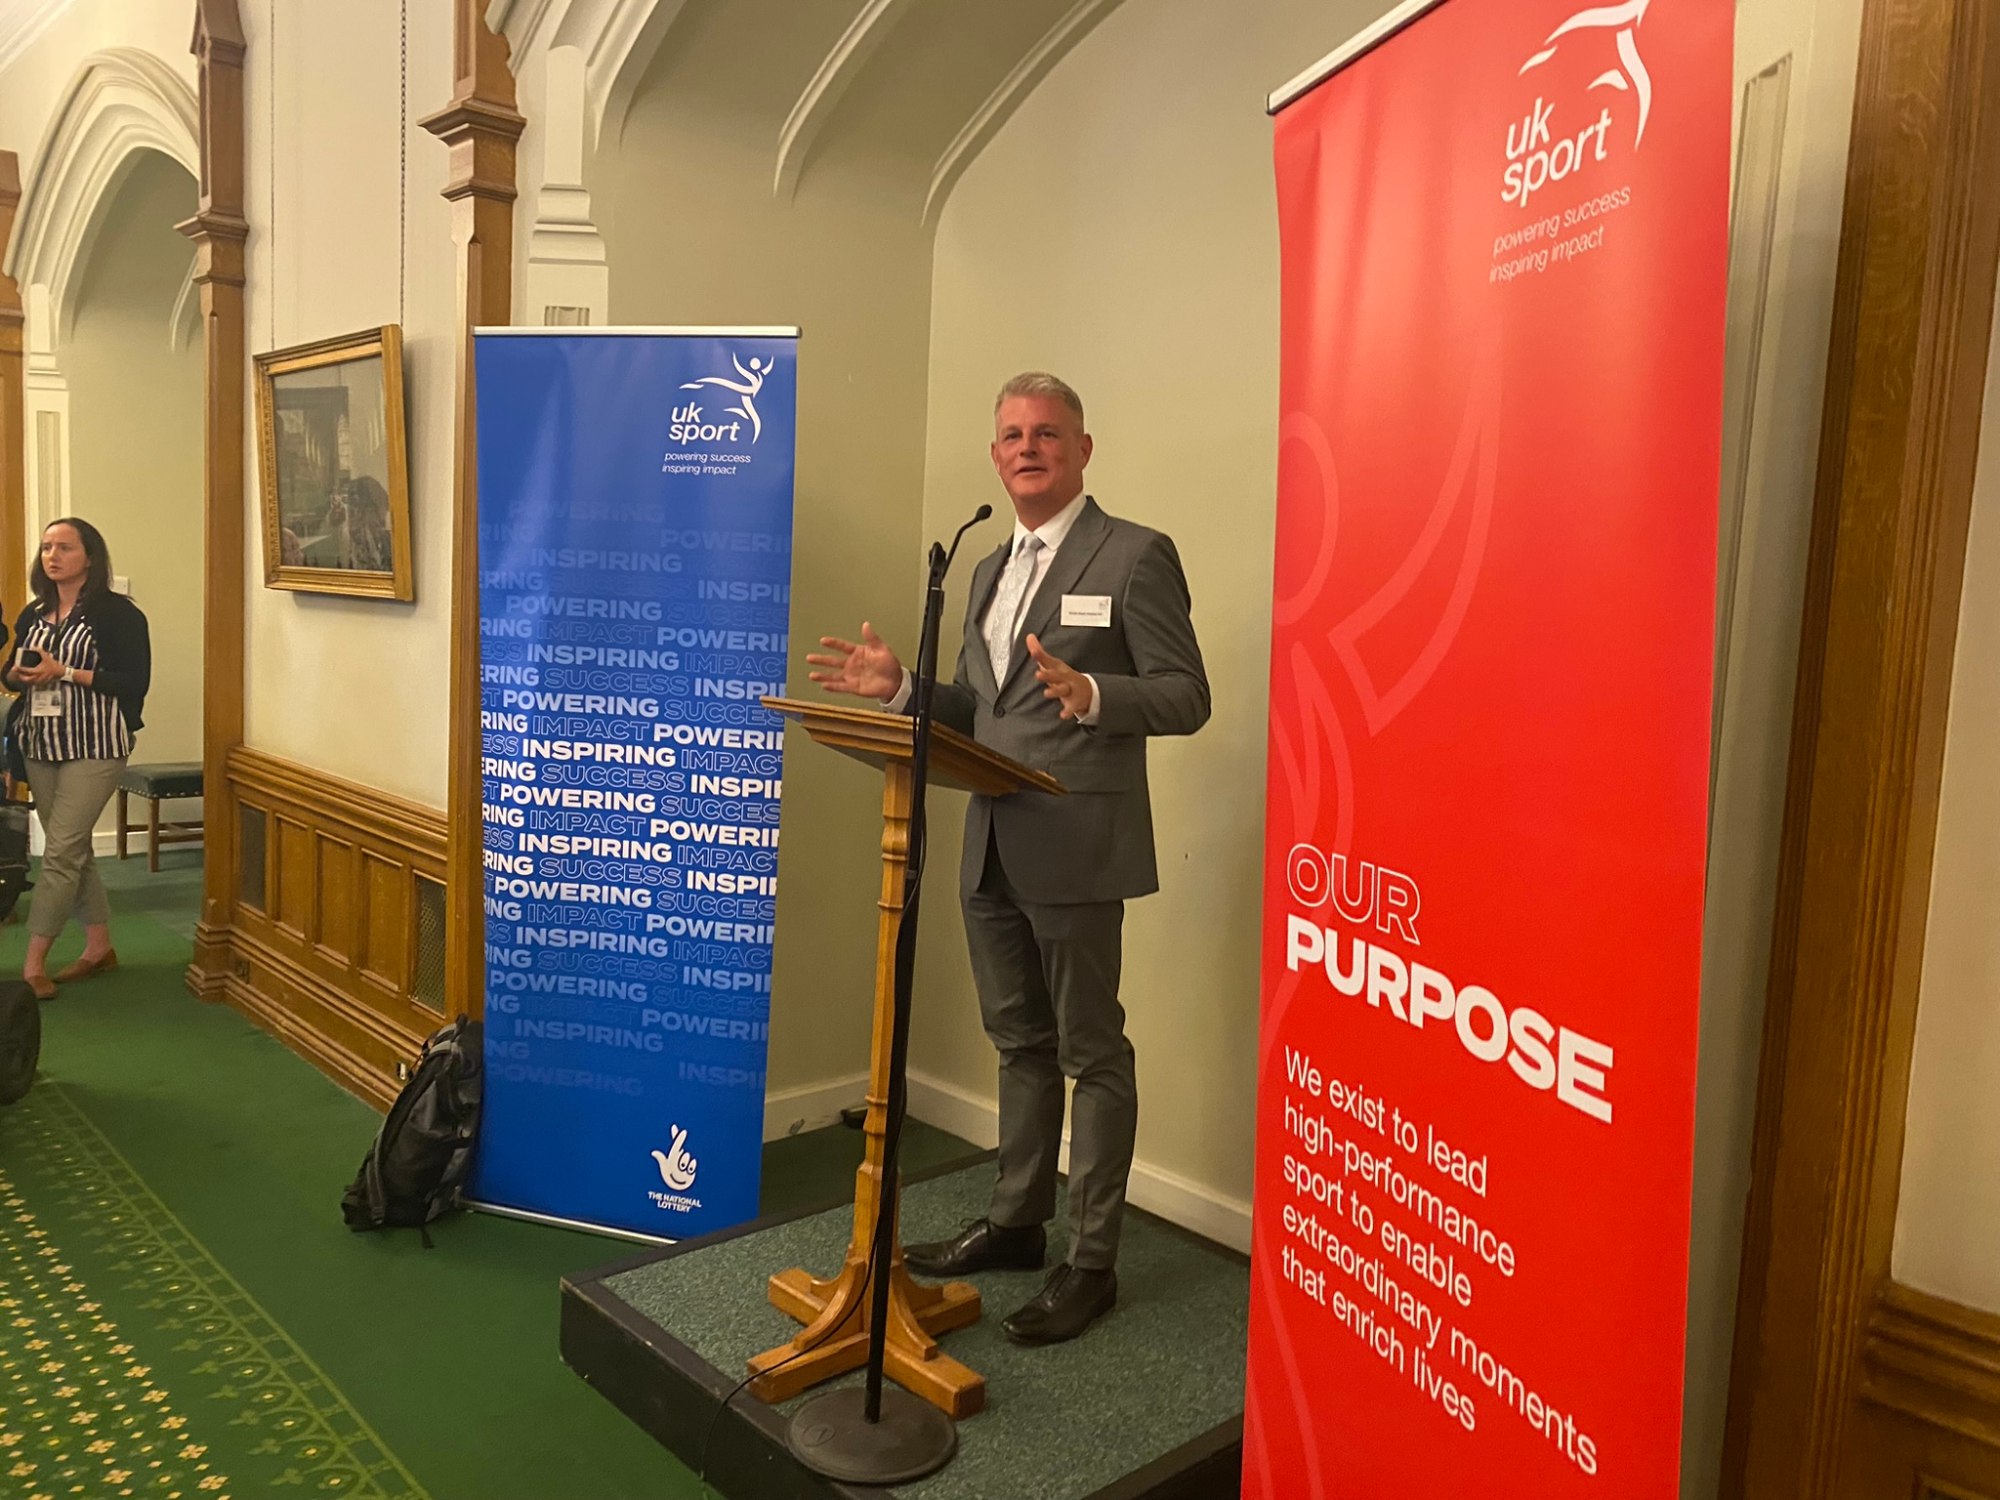 Minister for Sport, Stuart Andrew MP, speaking at the reception